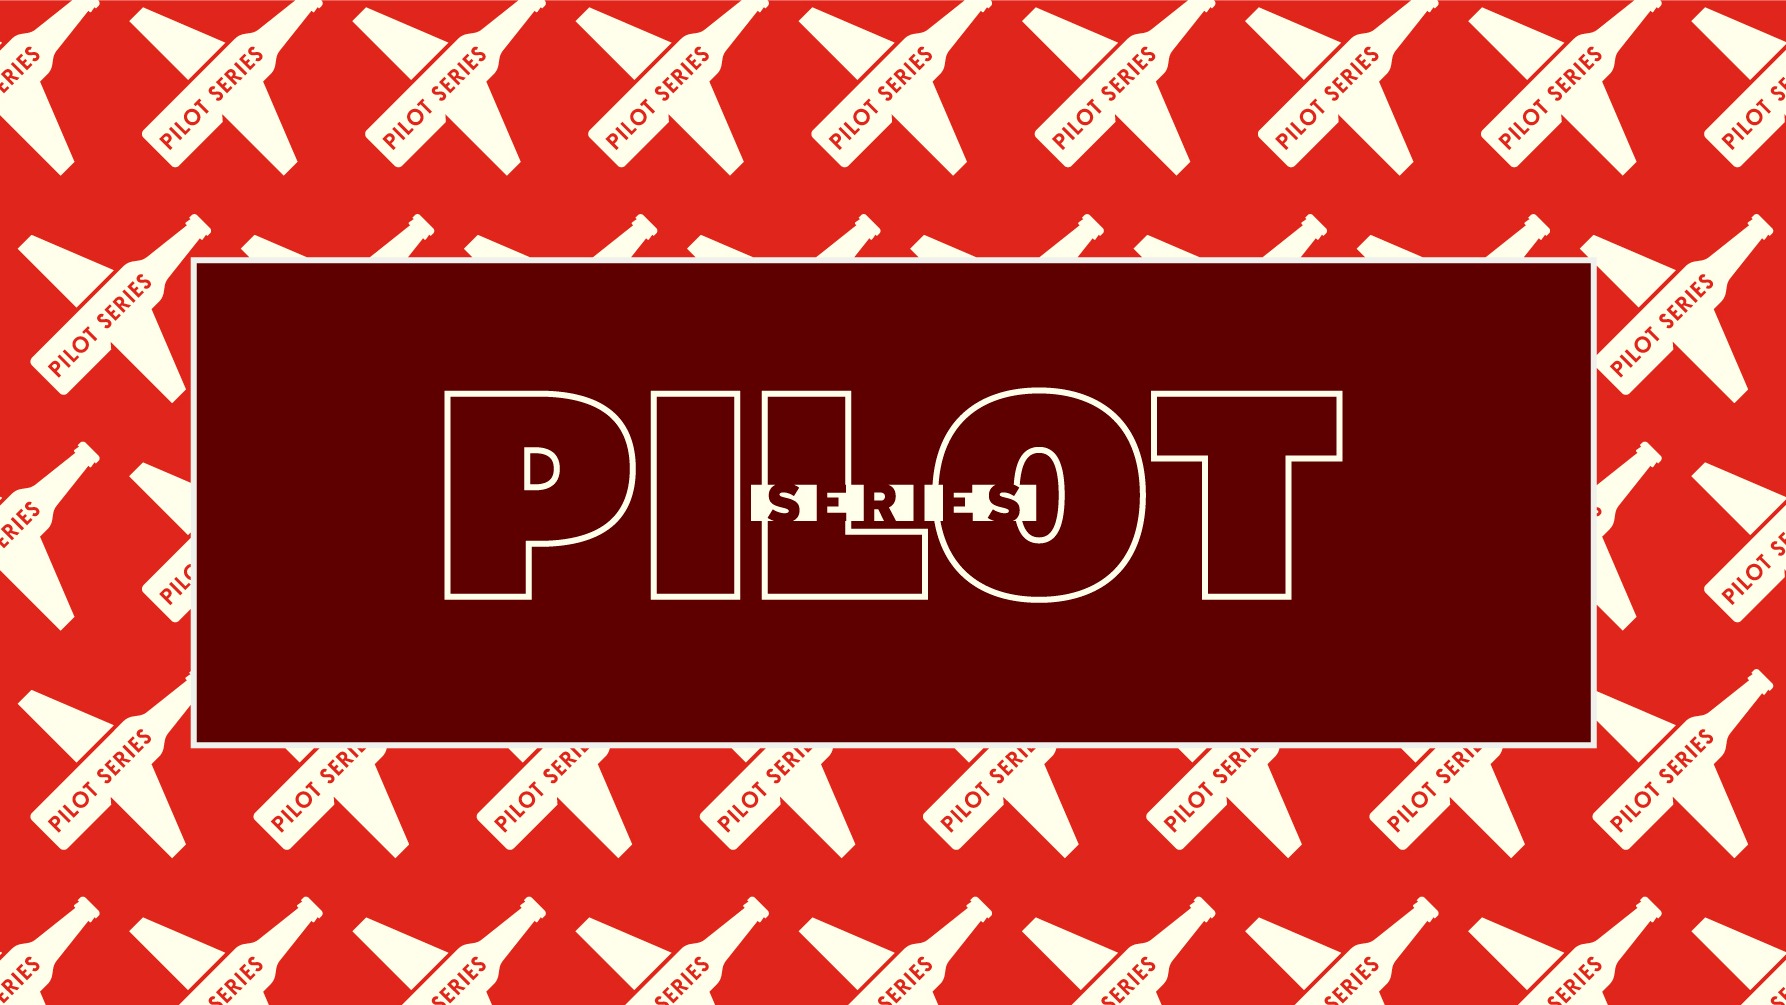 Maroon rectangle with the words "PILOT SERIES" in the center. A bigger red rectangle is behind the maroon one. It has a white repeating pattern with beer bottles shaped like airplanes.